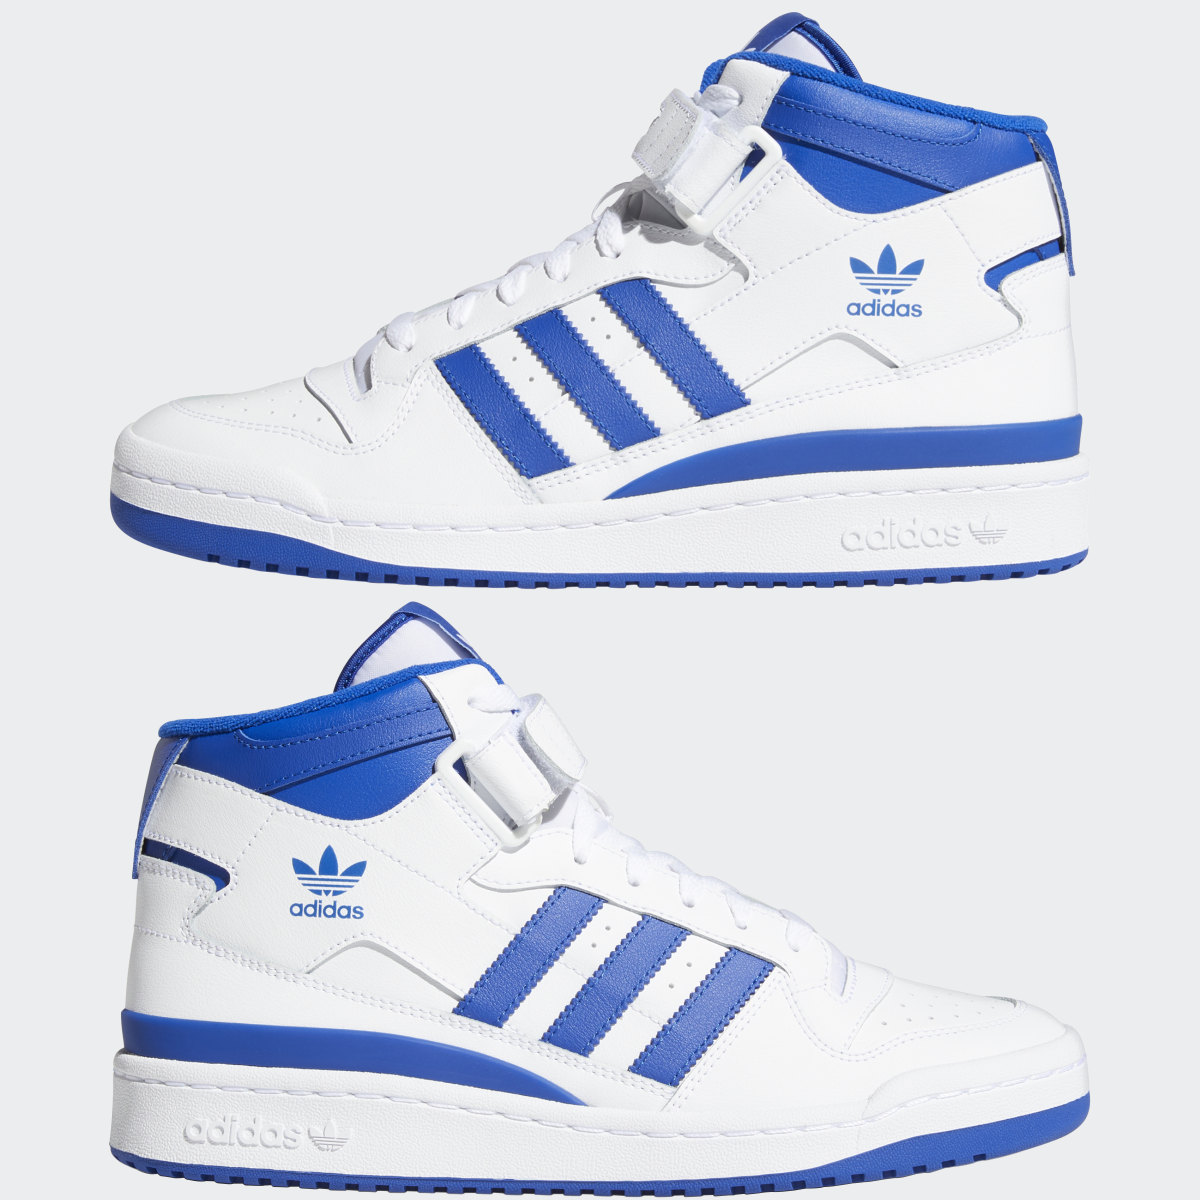 Adidas Forum Mid Shoes. 8